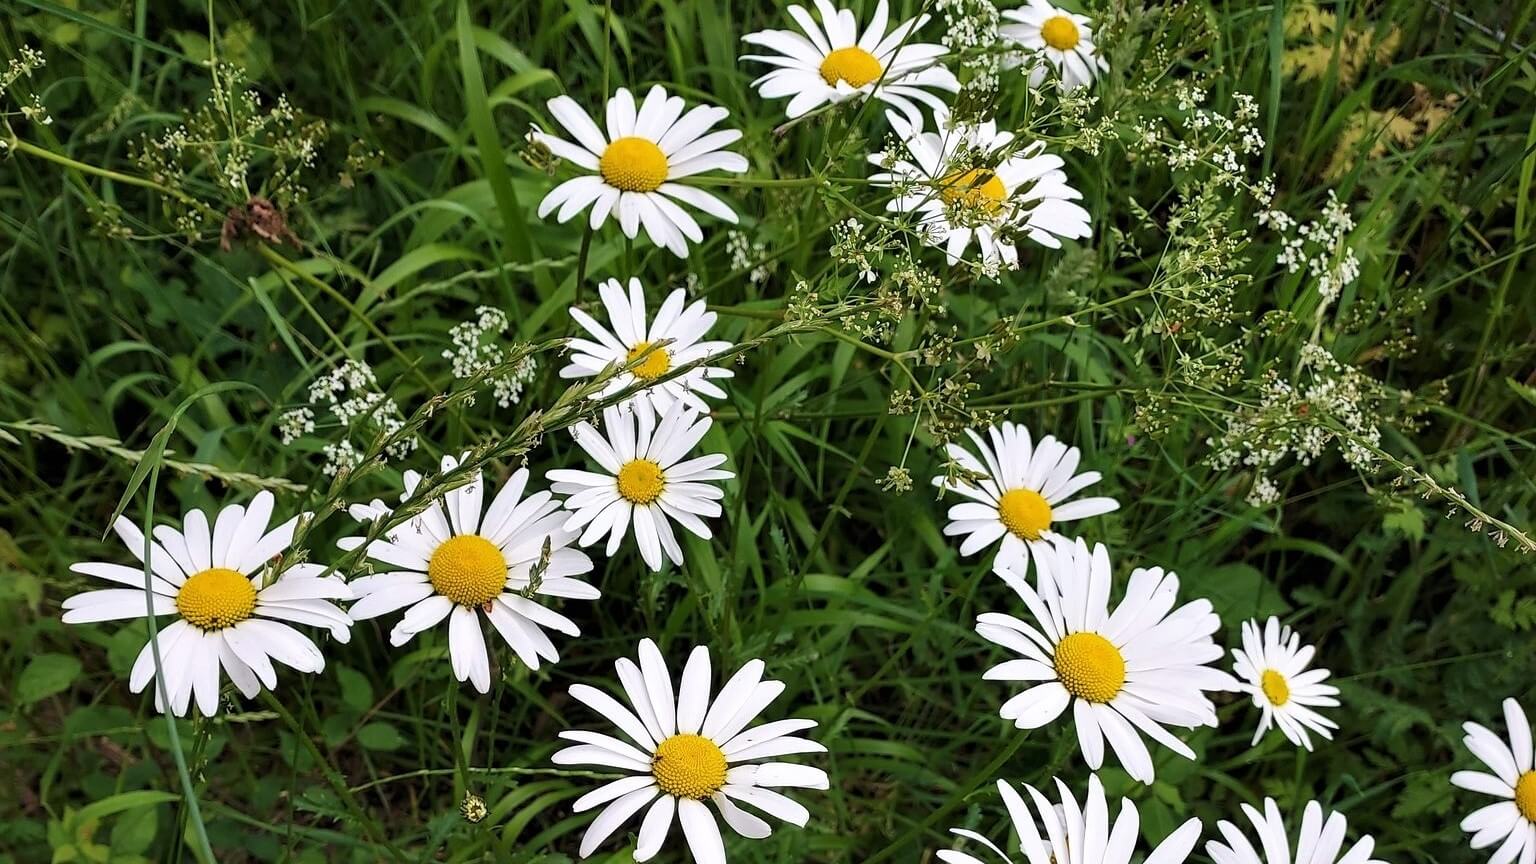 Large white and yellow daisies growing wild in a hedgerow